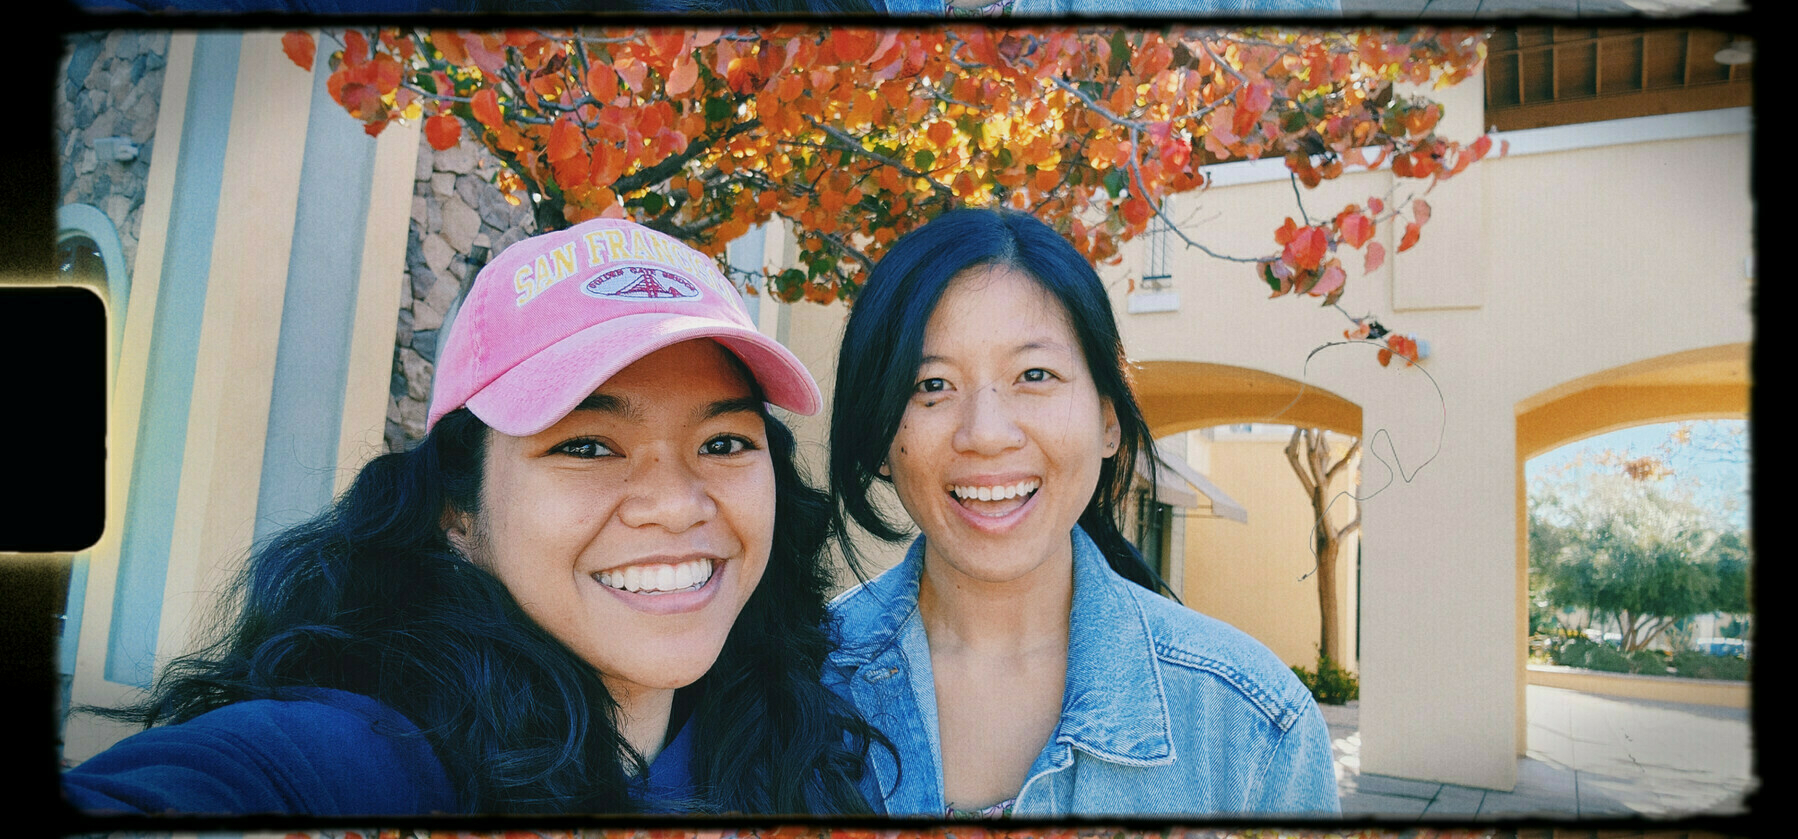 K— (left) and Kristine (right) in front of a tree with red orange leaves